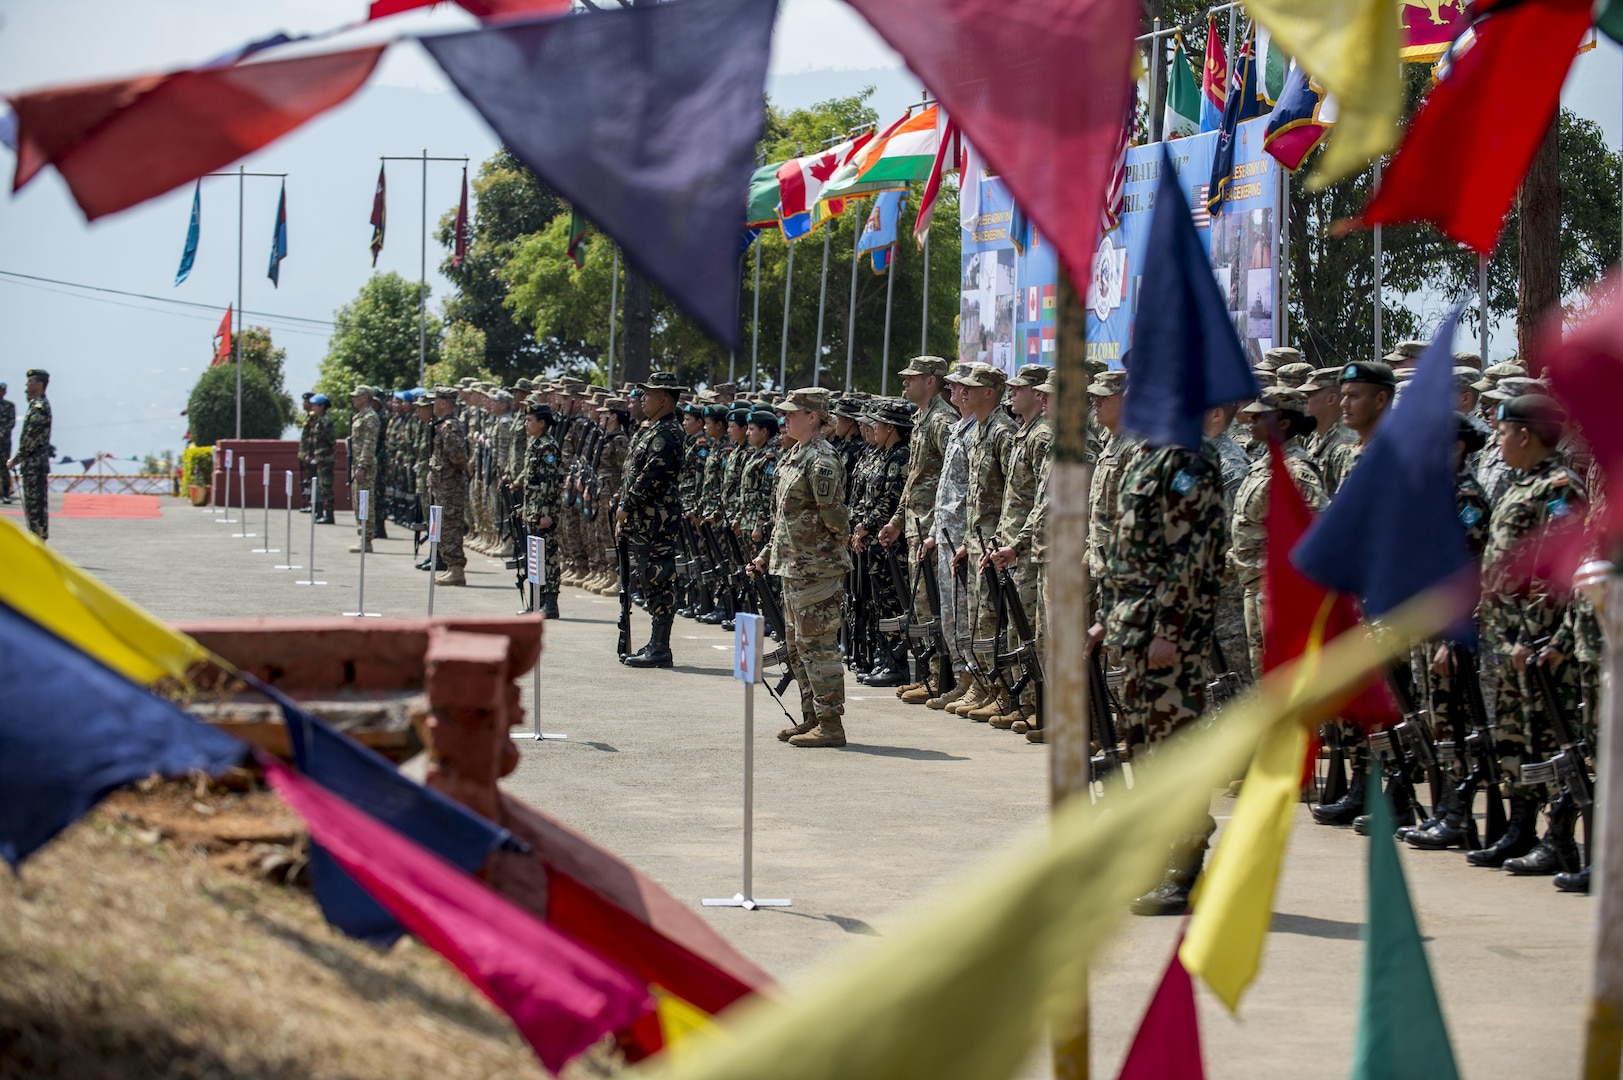 Militaries from more than 30 countries stand in formation during the opening ceremony of Shanti Prayas III in Nepal. Shanti Prayas III is a multinational United Nations peacekeeping exercise designed to provide pre-deployment training to U.N. partner countries in preparation for real-world peacekeeping operations. (U.S. Navy Photo by Petty Officer 2nd Class Taylor Mohr)